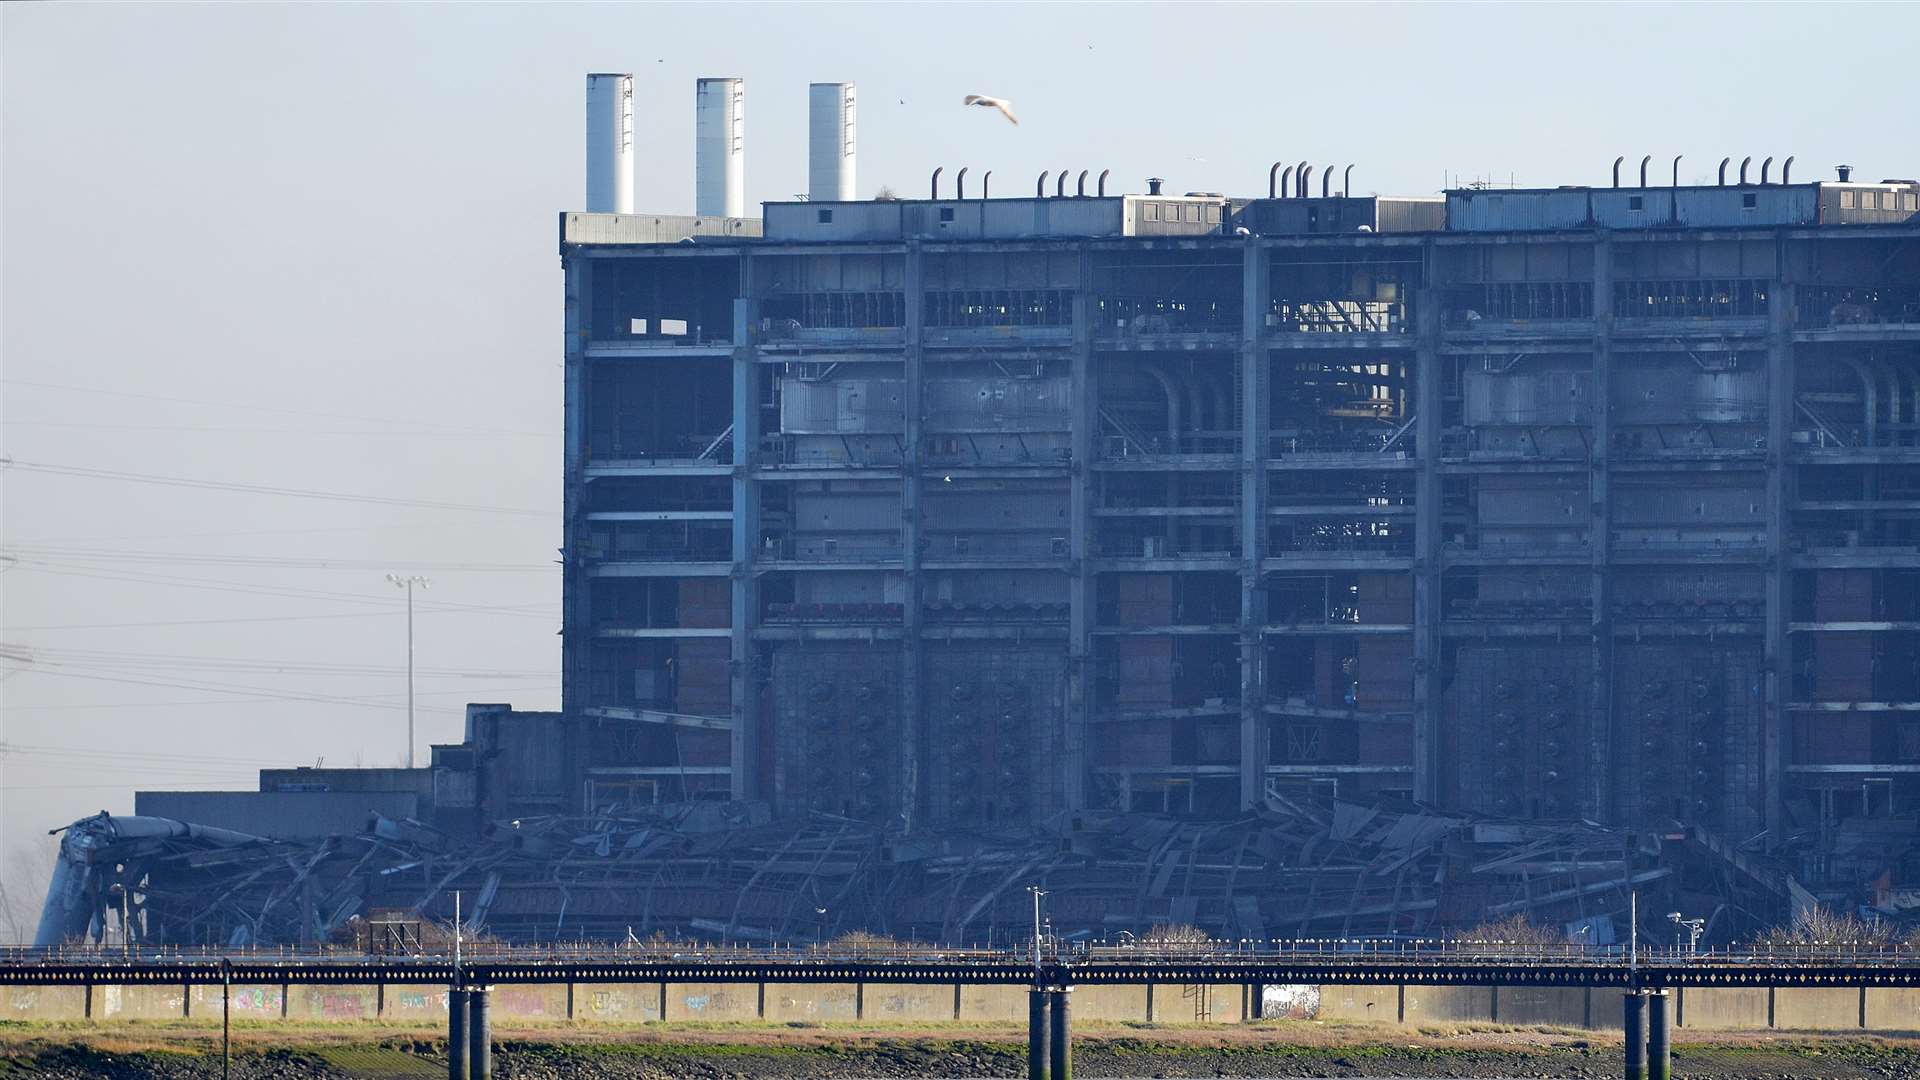 The aftermath of the tenth demolition at Tilbury power Station. Picture Credit: Jason Arthur